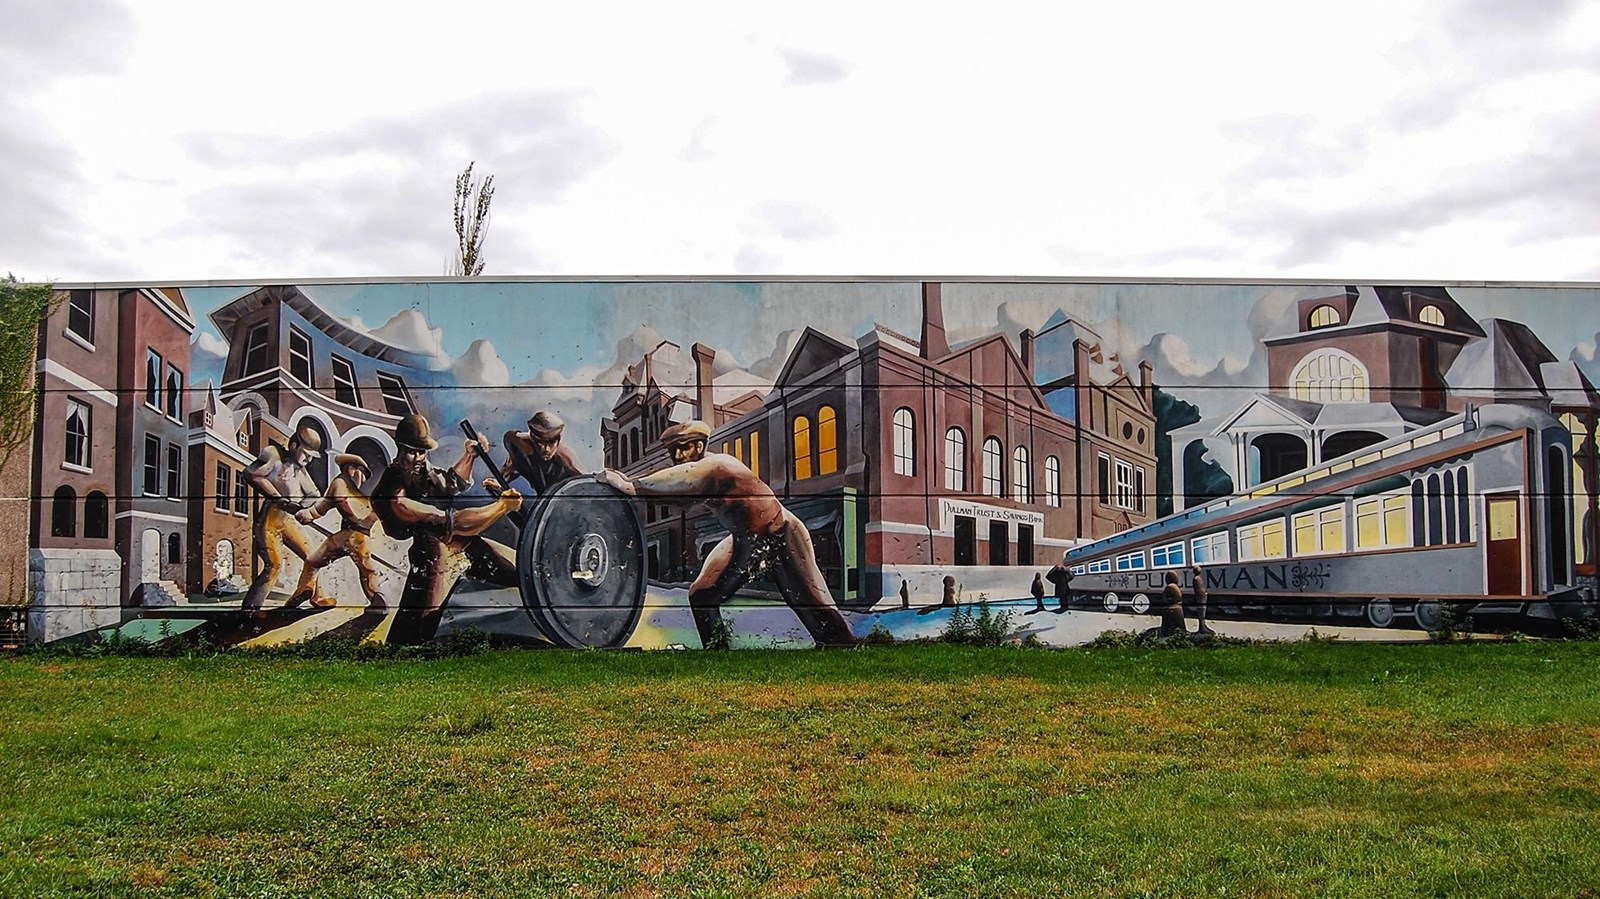 A mural on the backside of a building depicting workers, historic buildings, and trains.